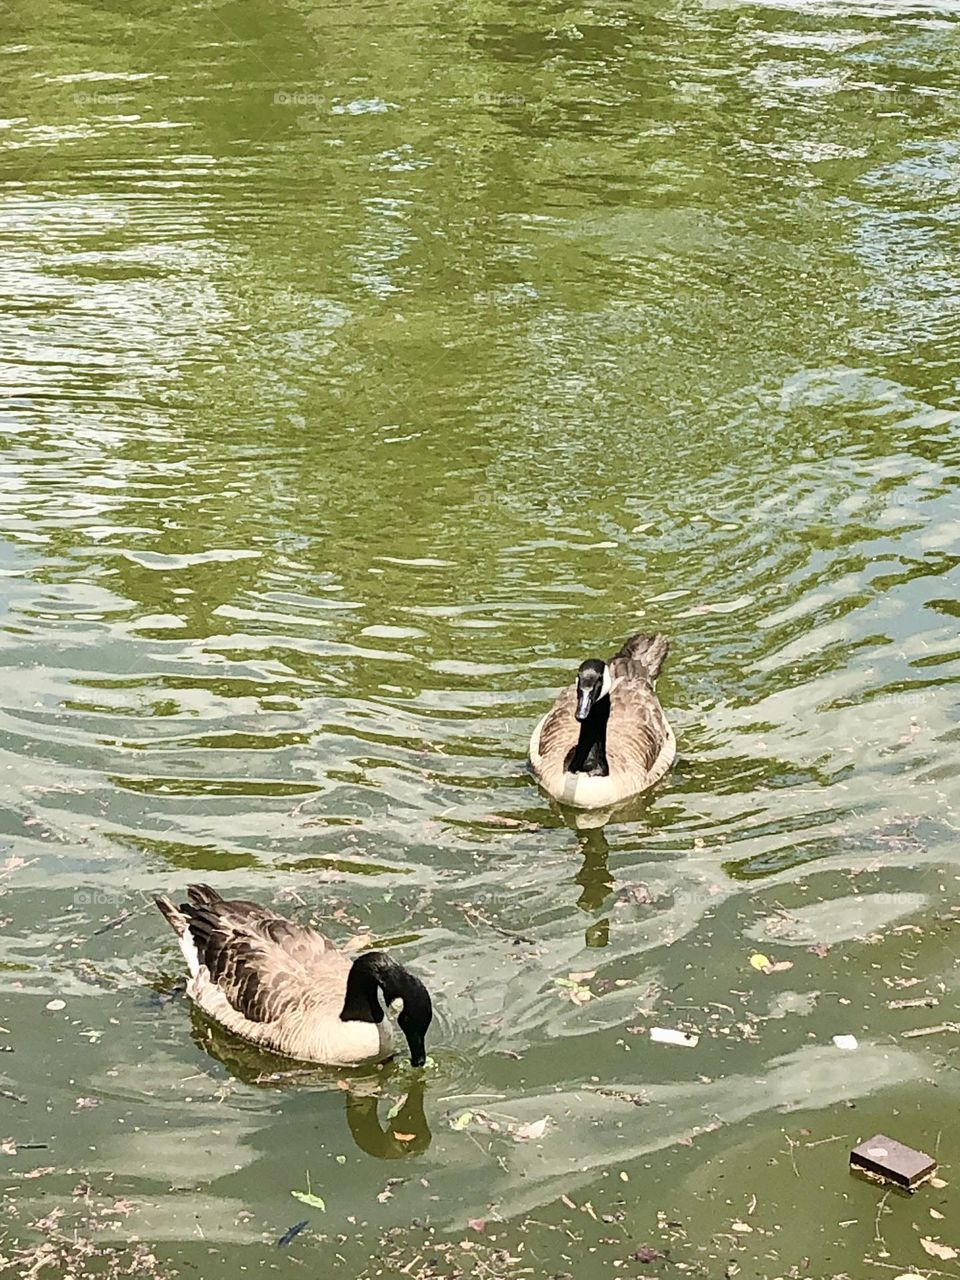 Close up with the Ducks - Summer time. 🦆